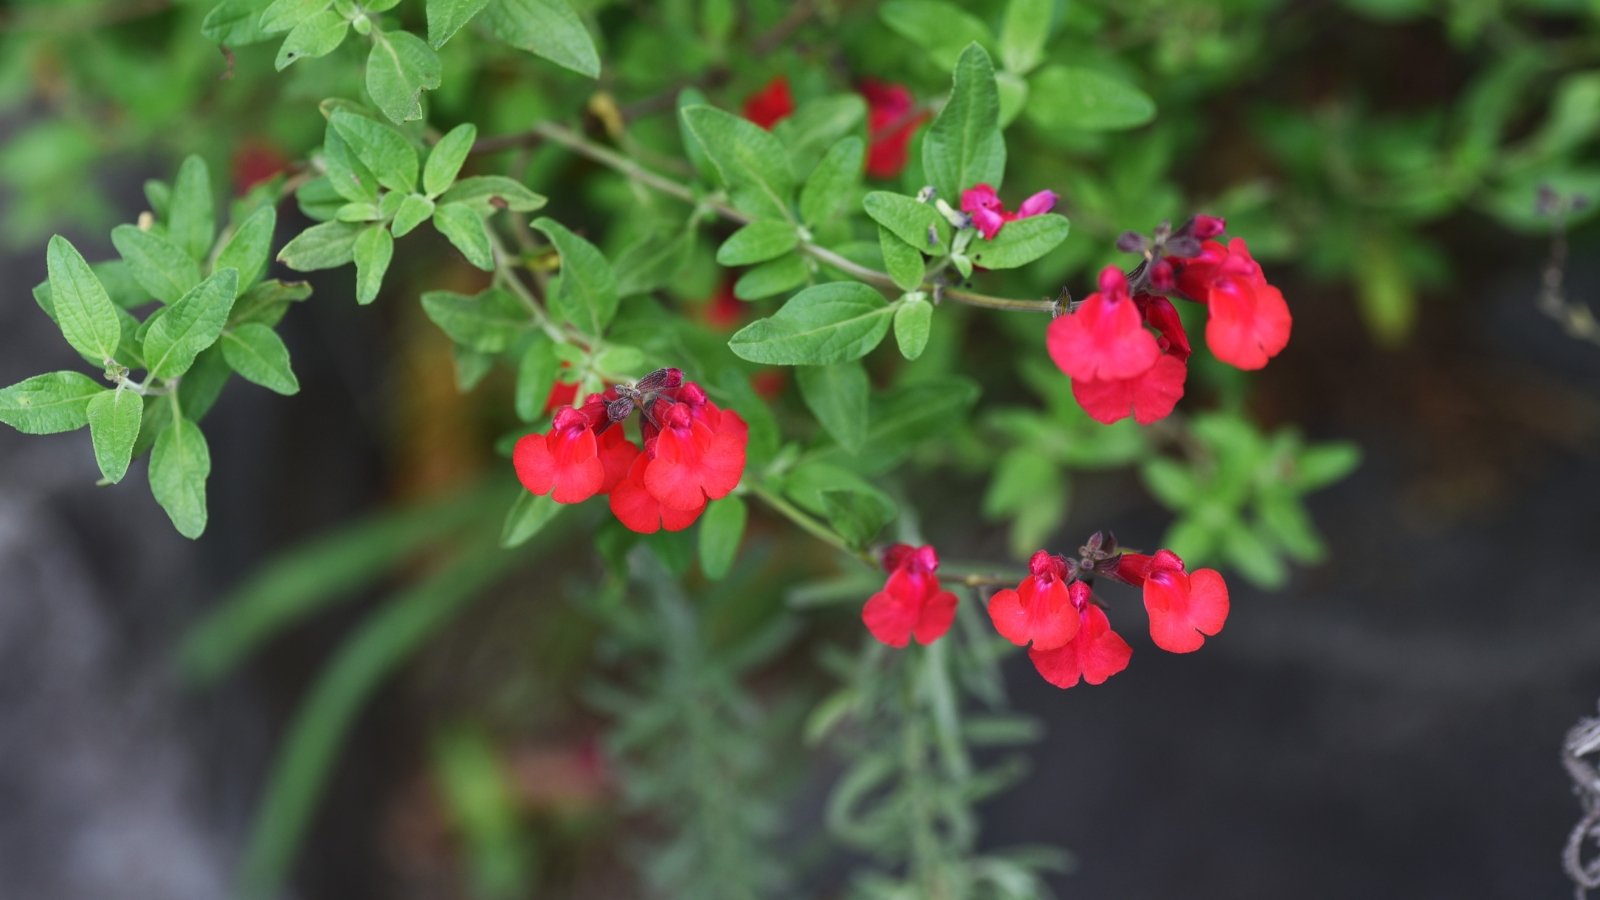 Autumn Sage displays lance-shaped, gray-green leaves that provide a lovely backdrop to its profusion of tubular red flowers, showcased in a large black pot in the garden.